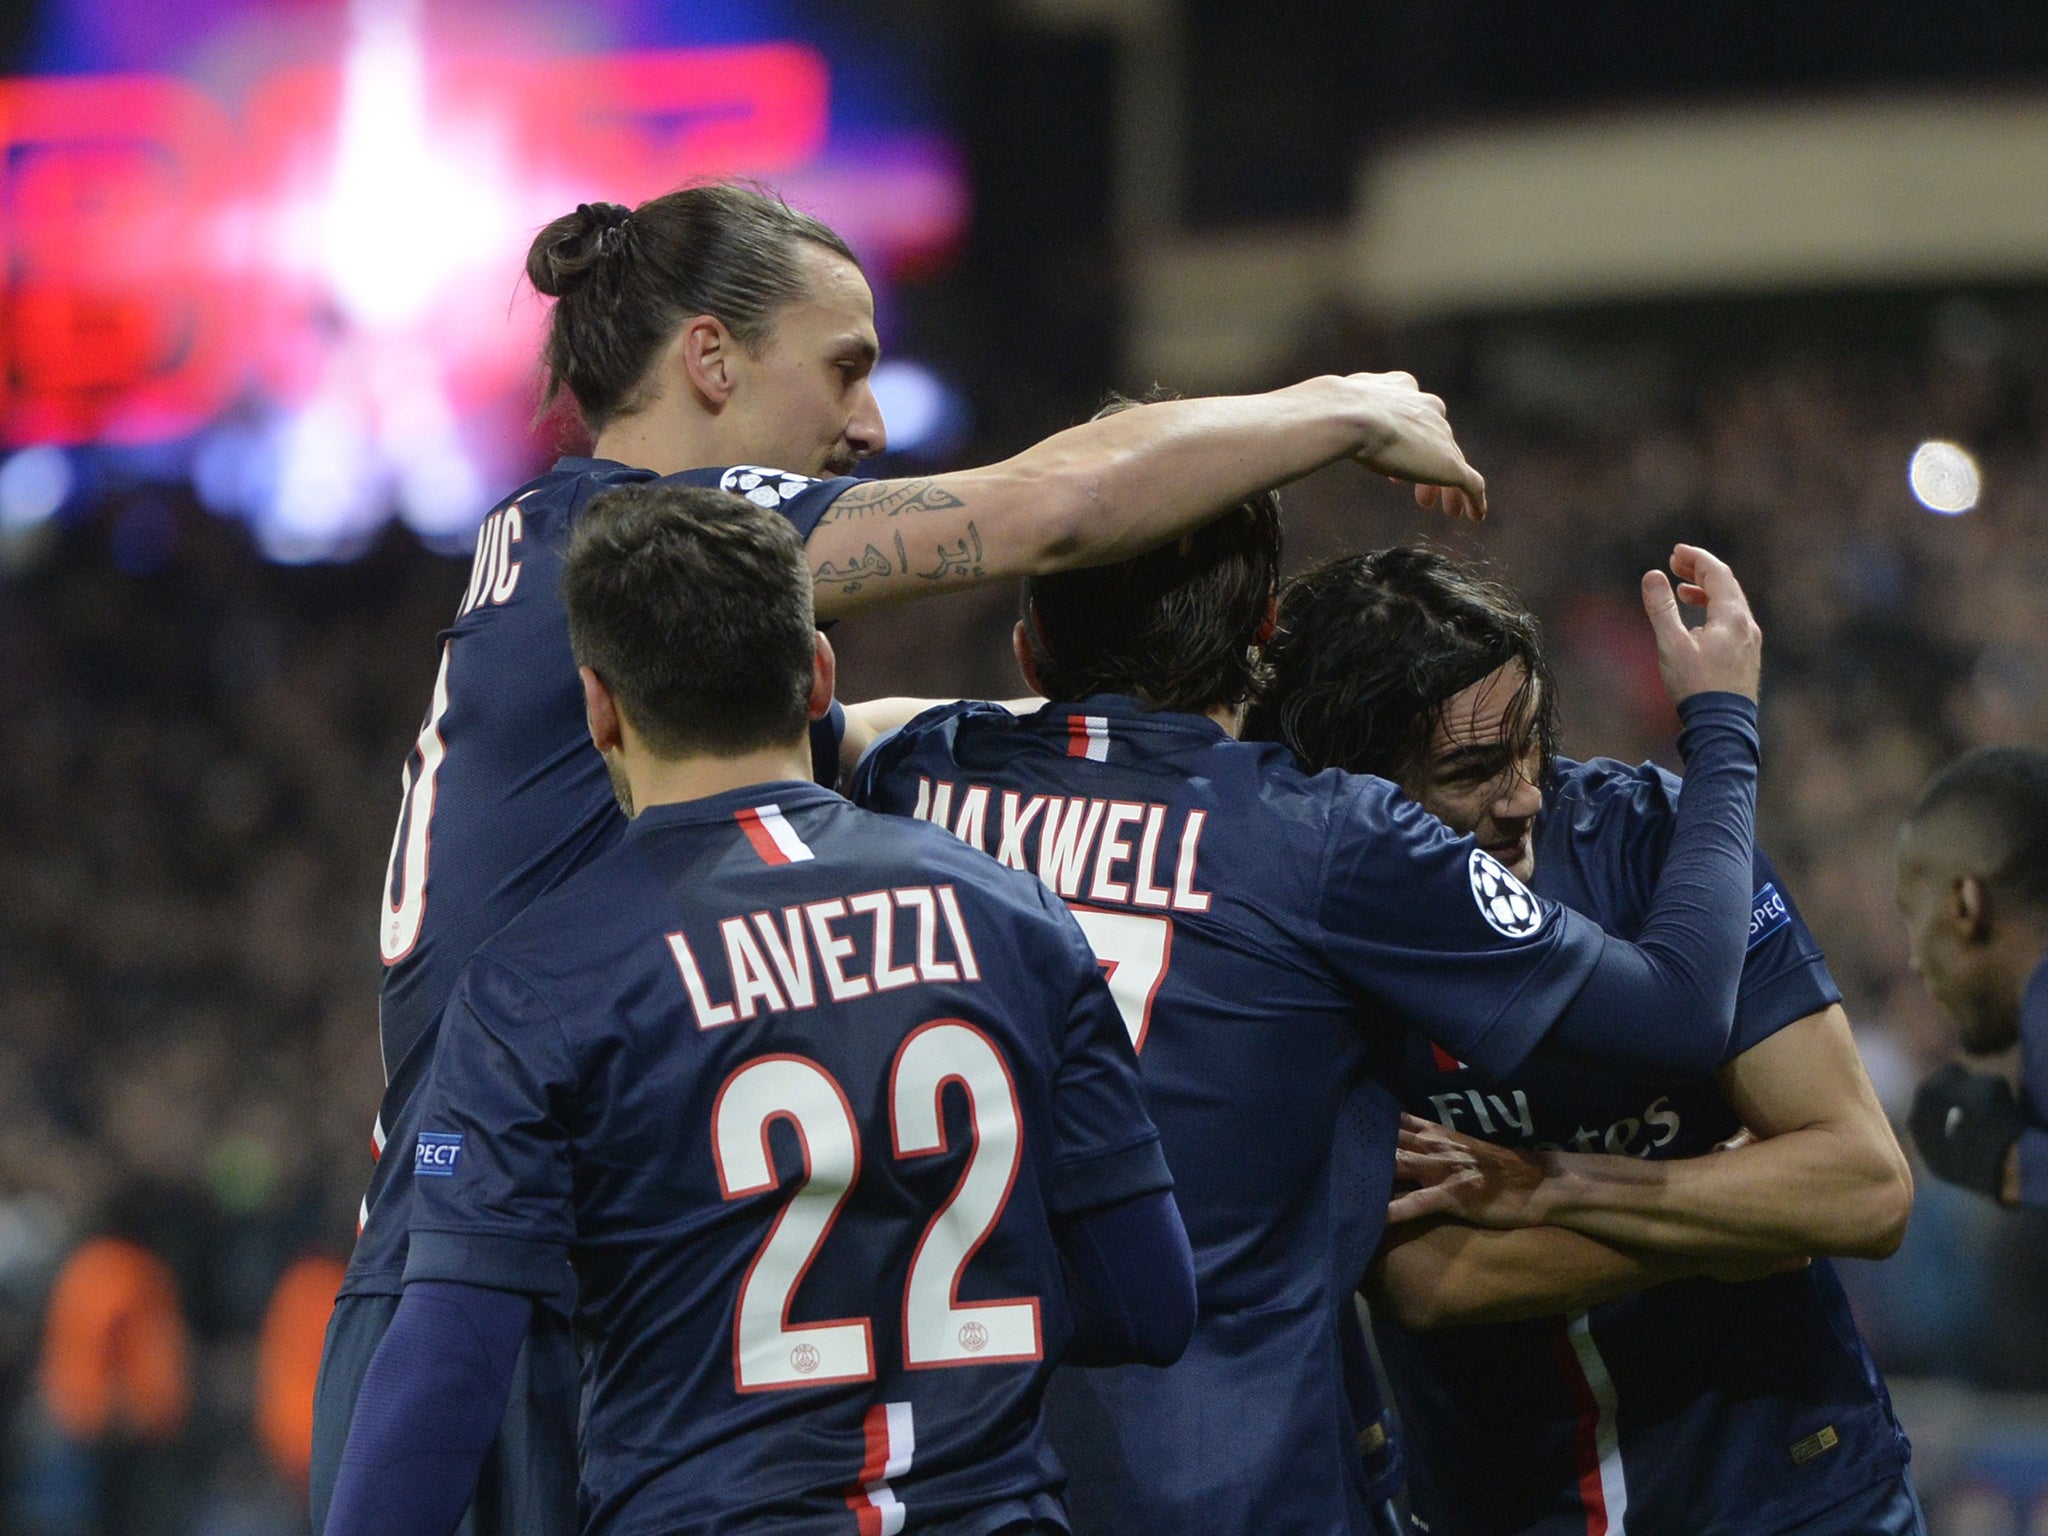 Uefa have judged PSG to have violated FFP rules